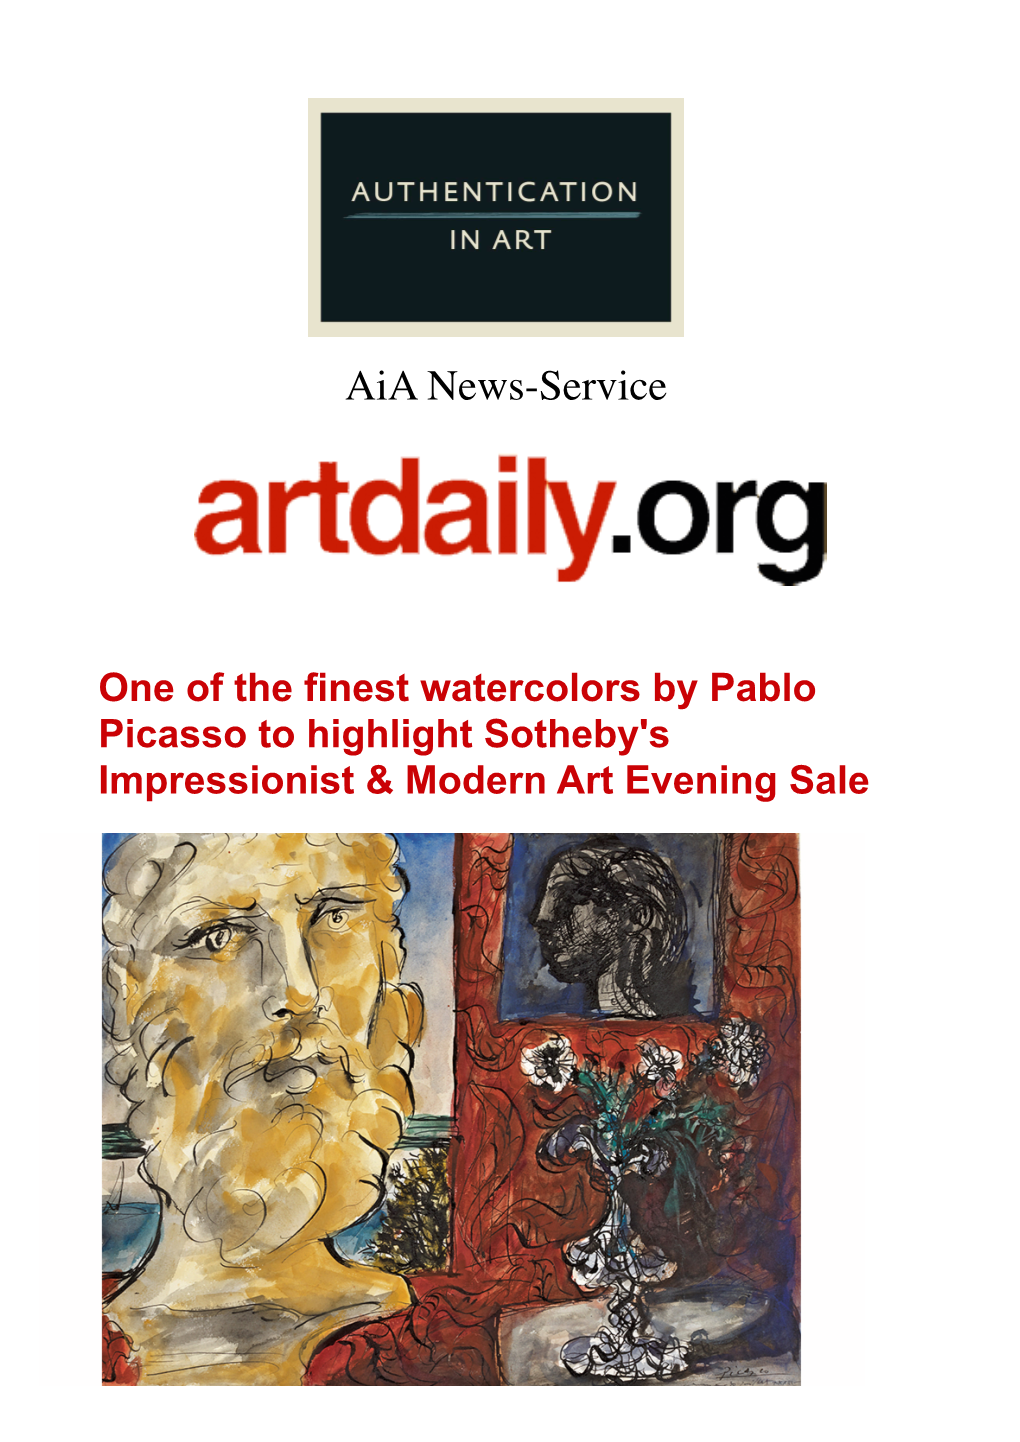 One of the Finest Watercolors by Pablo Picasso to Highlight Sotheby's